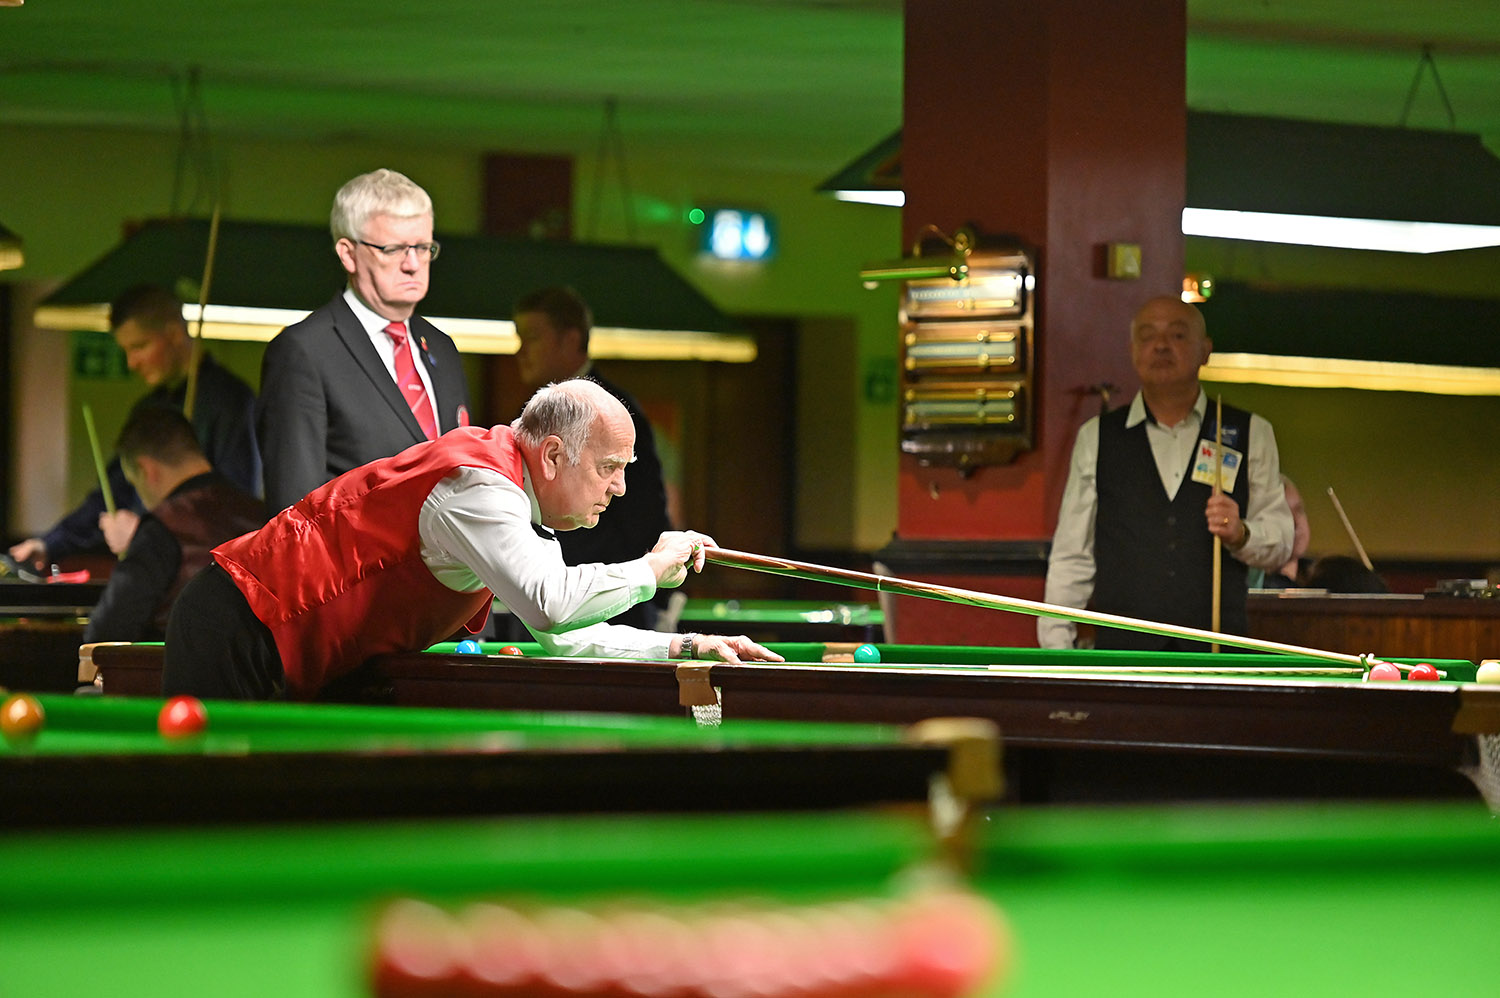 Ronnie Allen plays snooker shot with rest